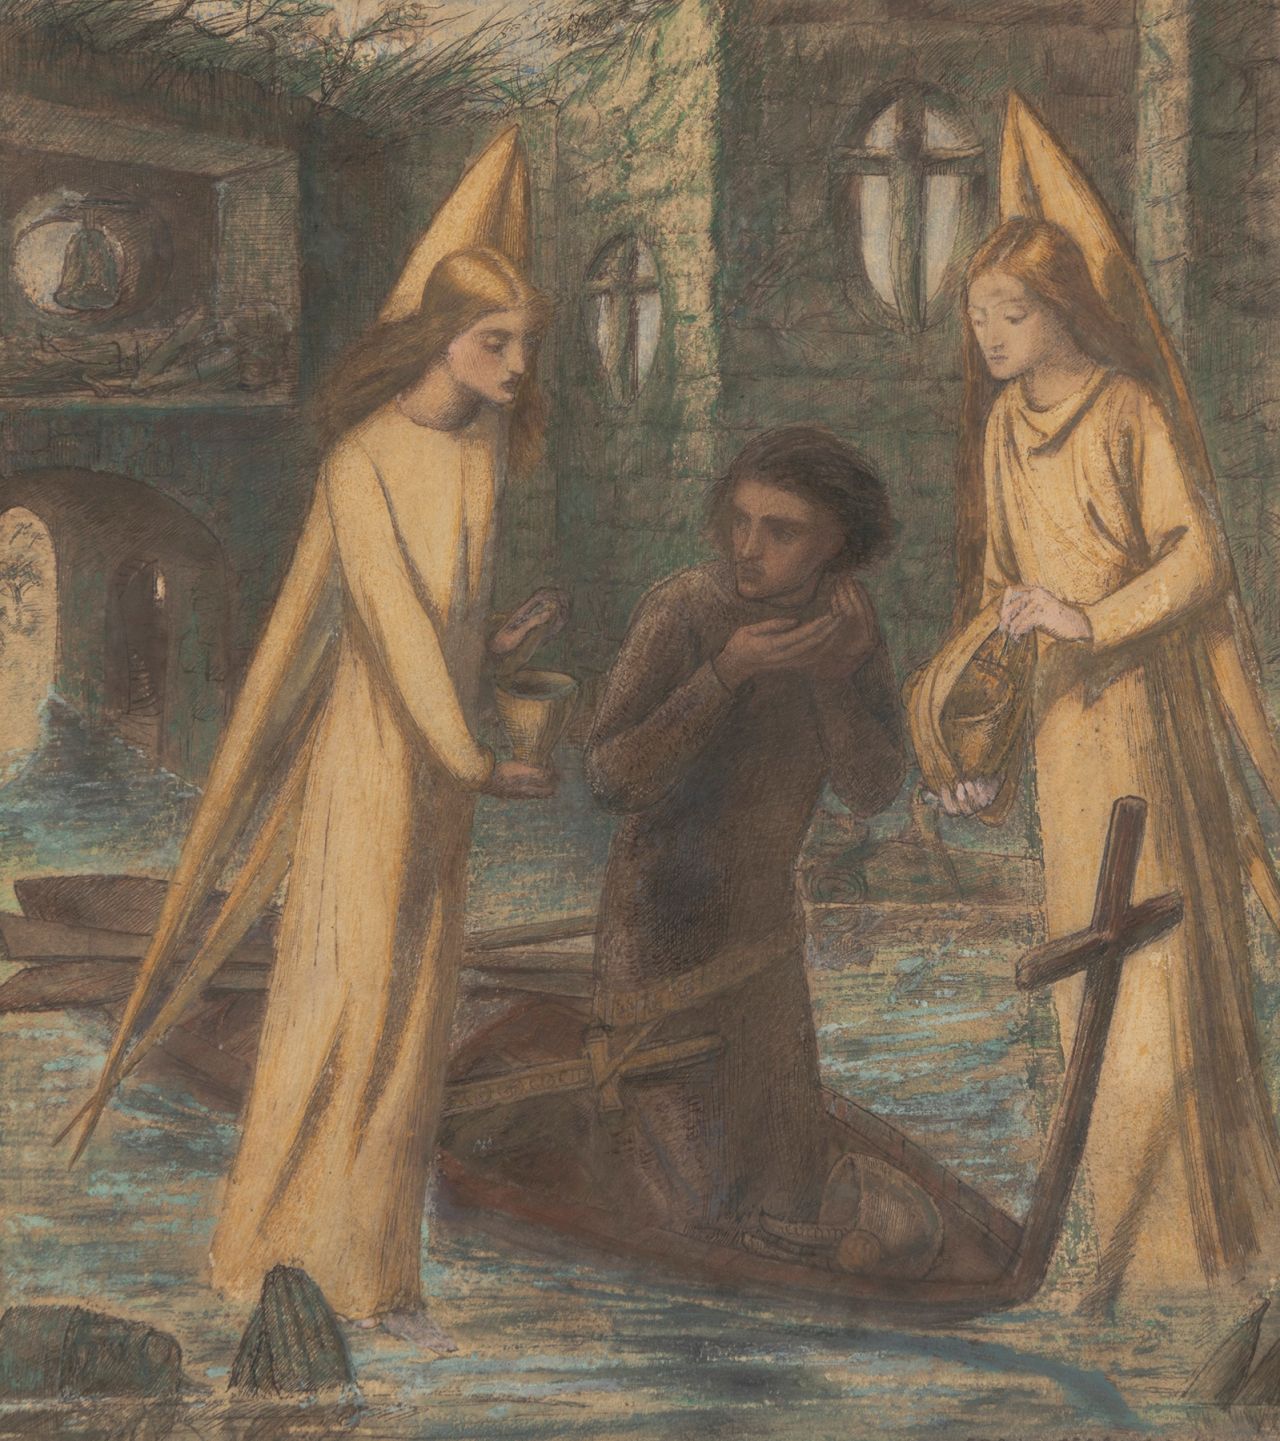 Siddal collaborated on the watercolor "Sir Galahad and the Holy Grail" with Rossetti.